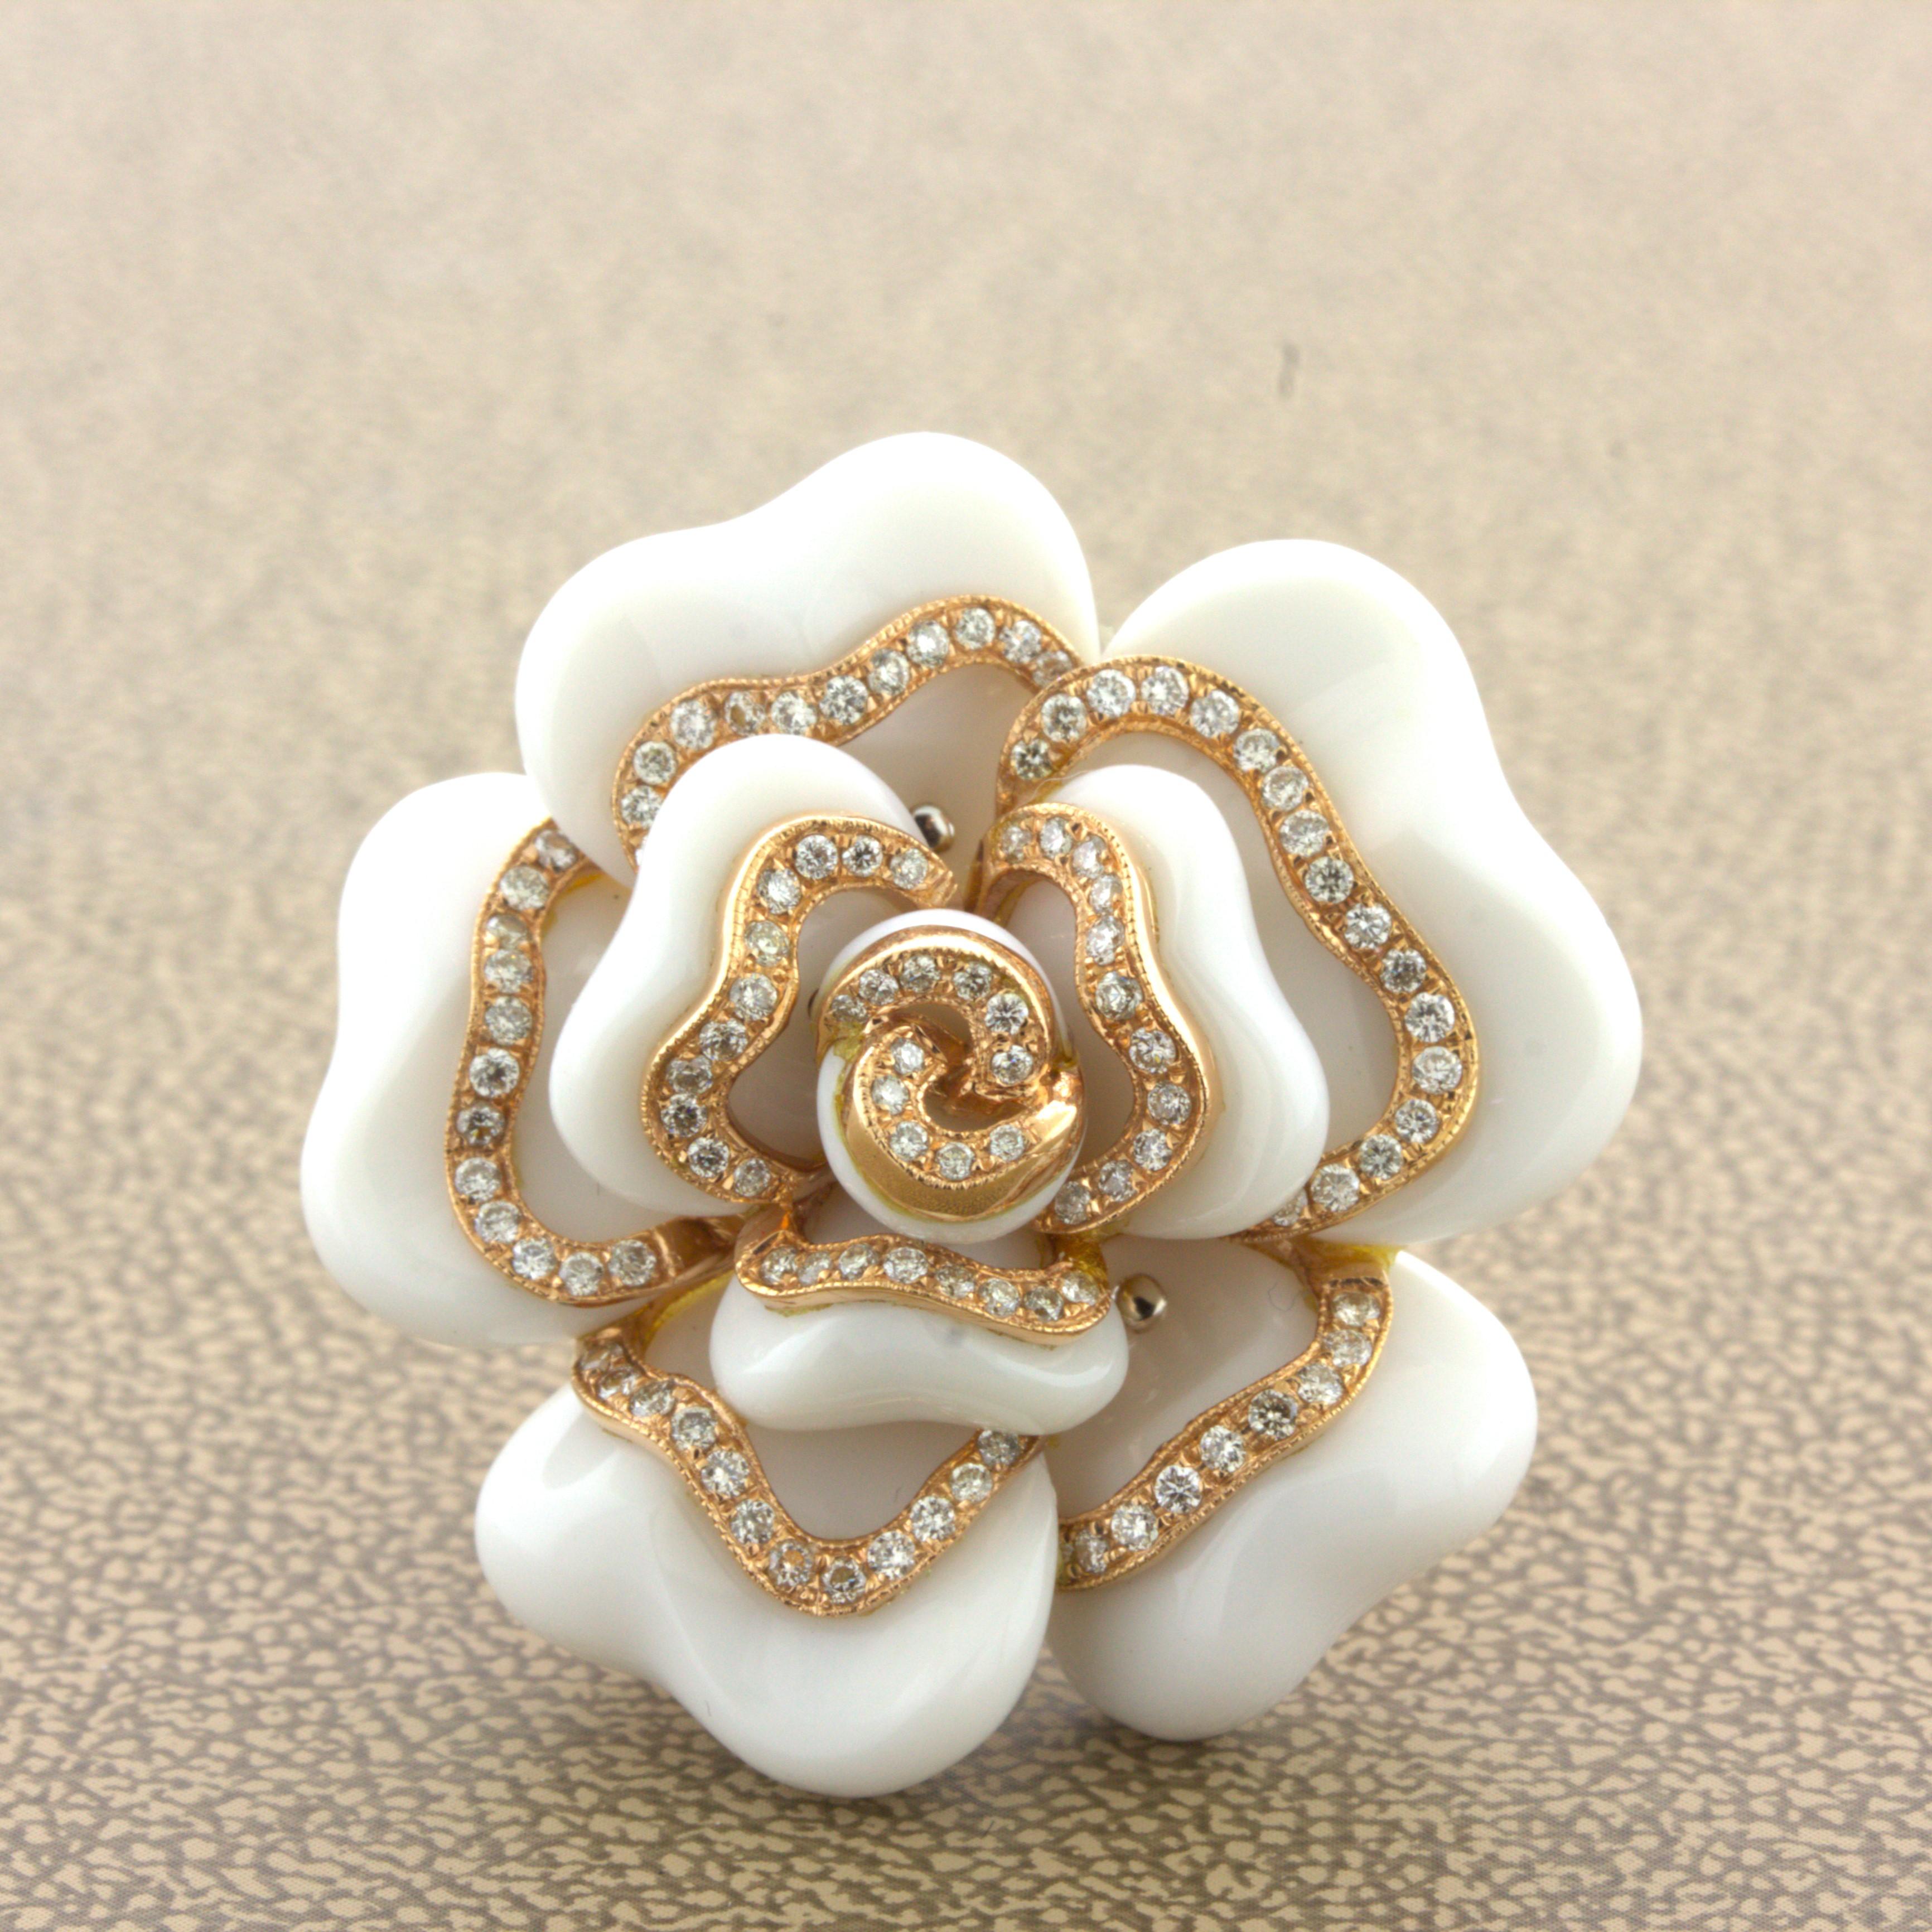 A sweet and fun cocktail ring made of carved white onyx and diamonds. The diamonds weigh 0.58 carats and are set around the pedals of the Camellia. The pedals themselves are made of 34.40 carats of white onyx which has been hand carved and polished